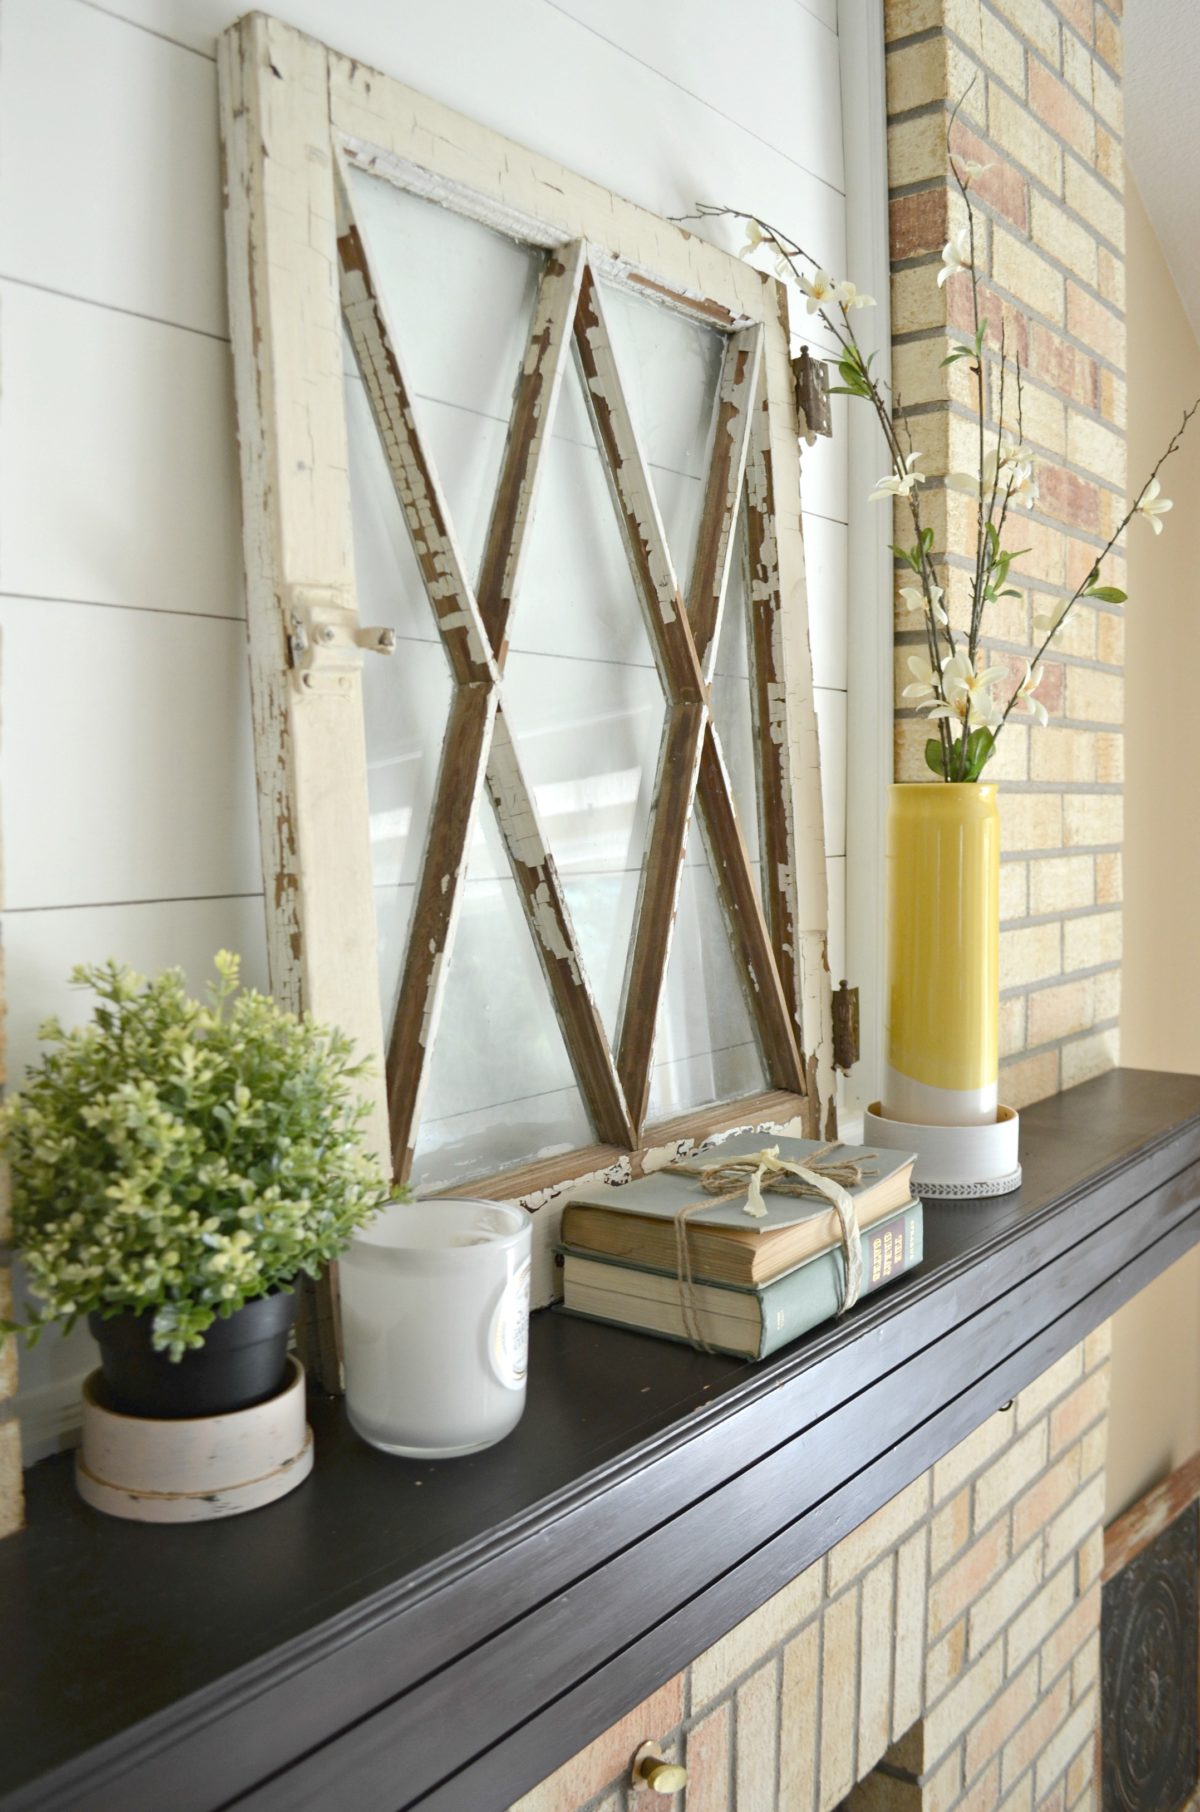 Fireplace Mantels for Sale Craigslist Awesome 4 Ways to Decorate with Old Windows